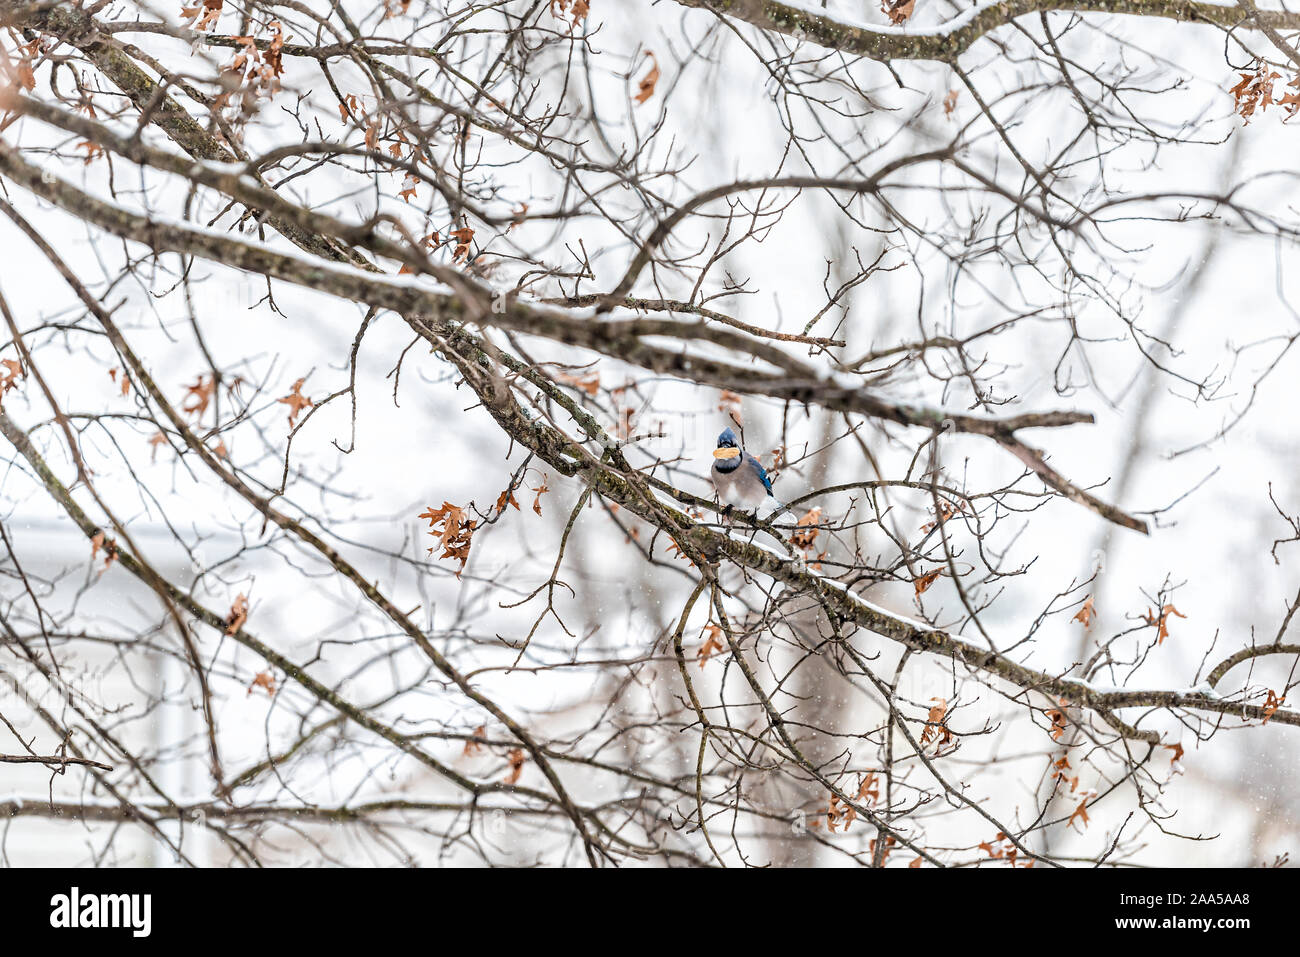 Blue jay, Cyanocitta cristata, one bird sitting perching on oak tree branch during winter covered in snow in Virginia holding eating peanut in shell Stock Photo